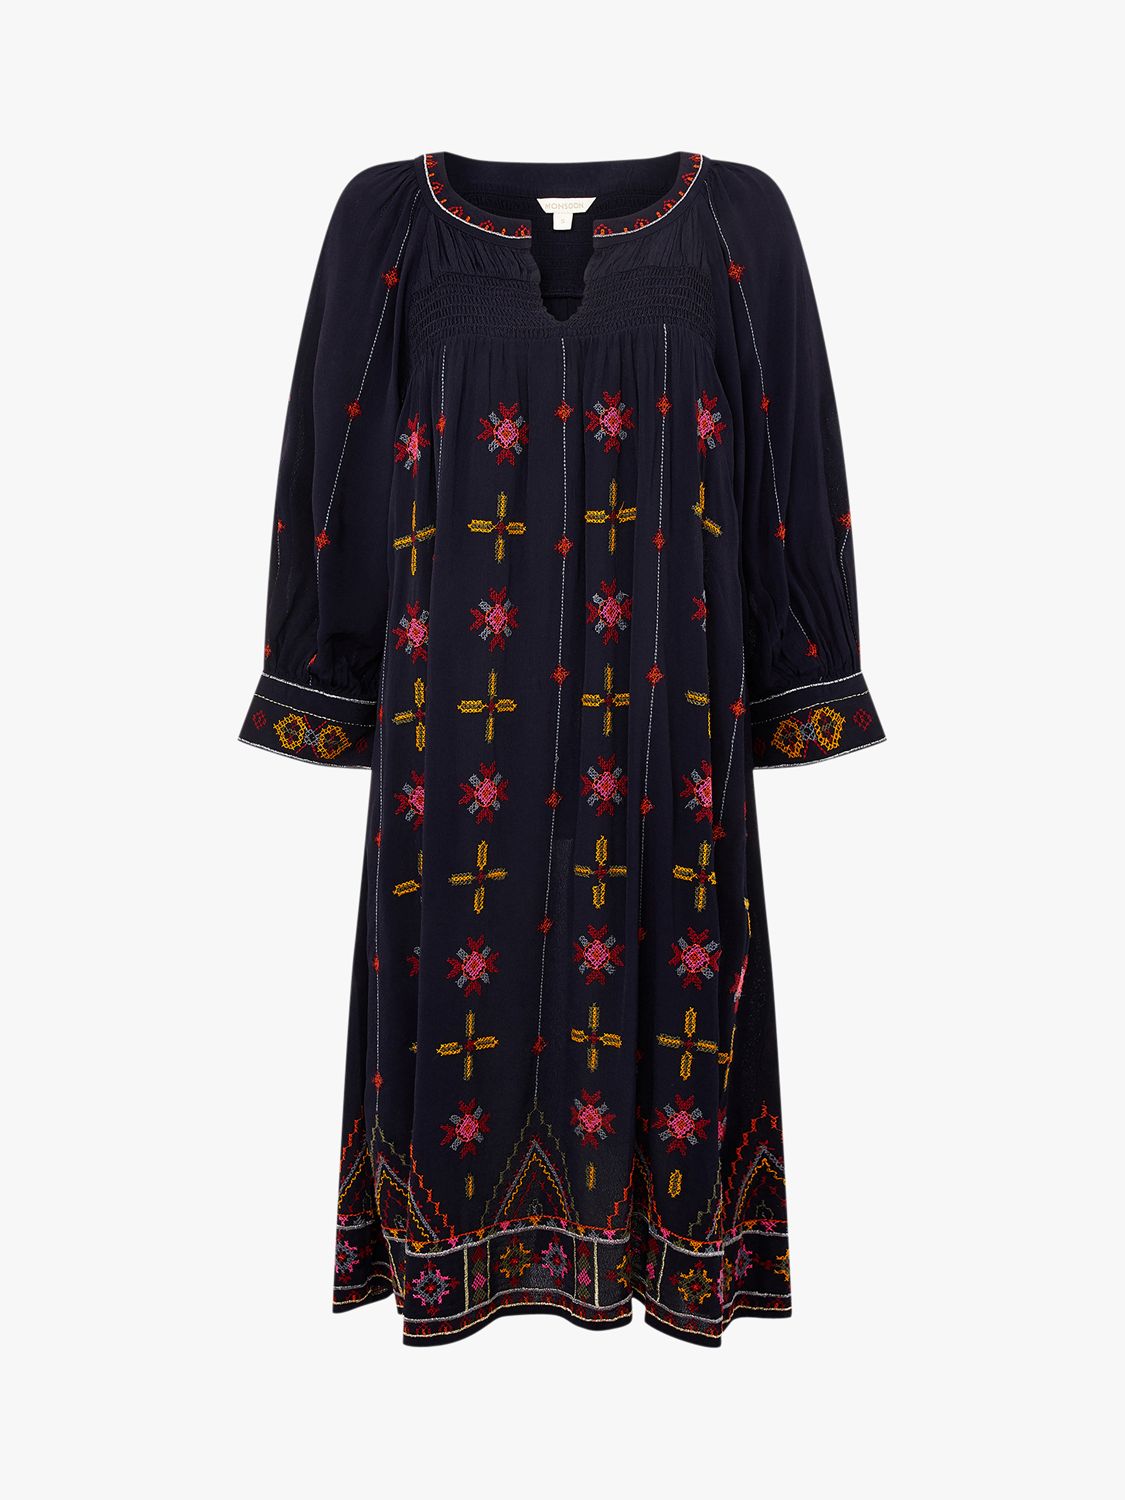 Monsoon Embroidered Tunic Dress, Navy